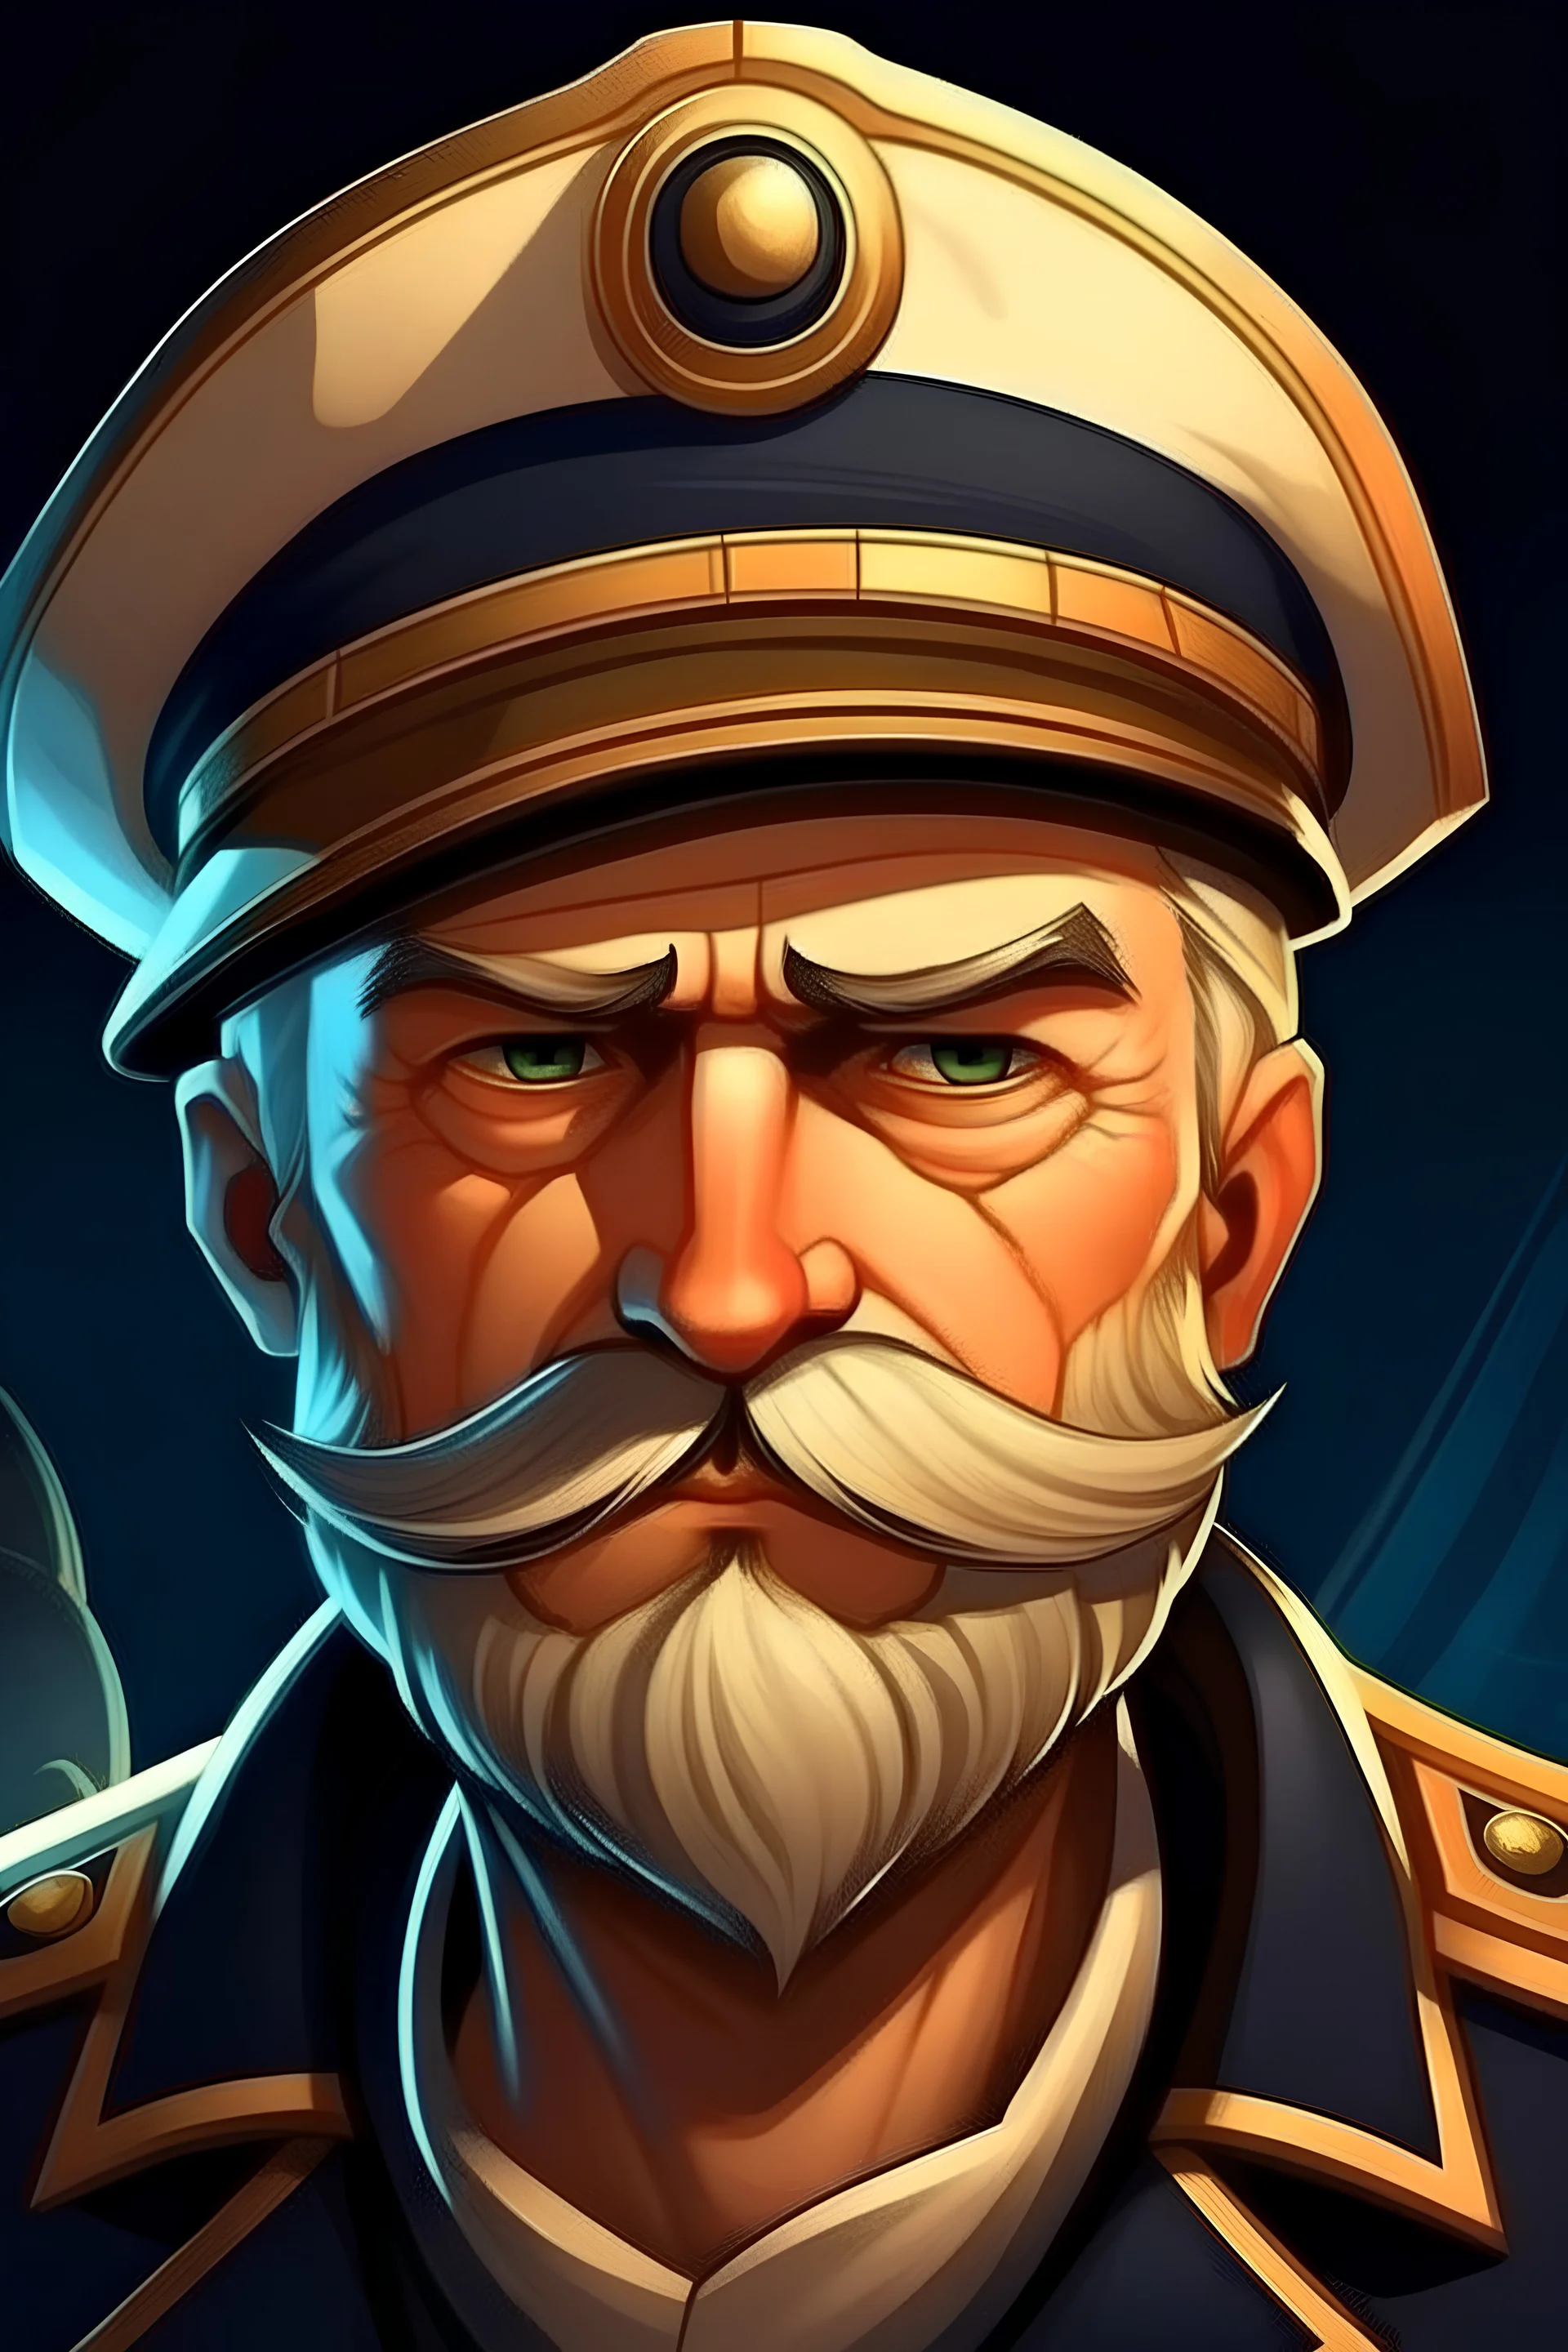 use uploade image to make captain on a Ship with a captains hat